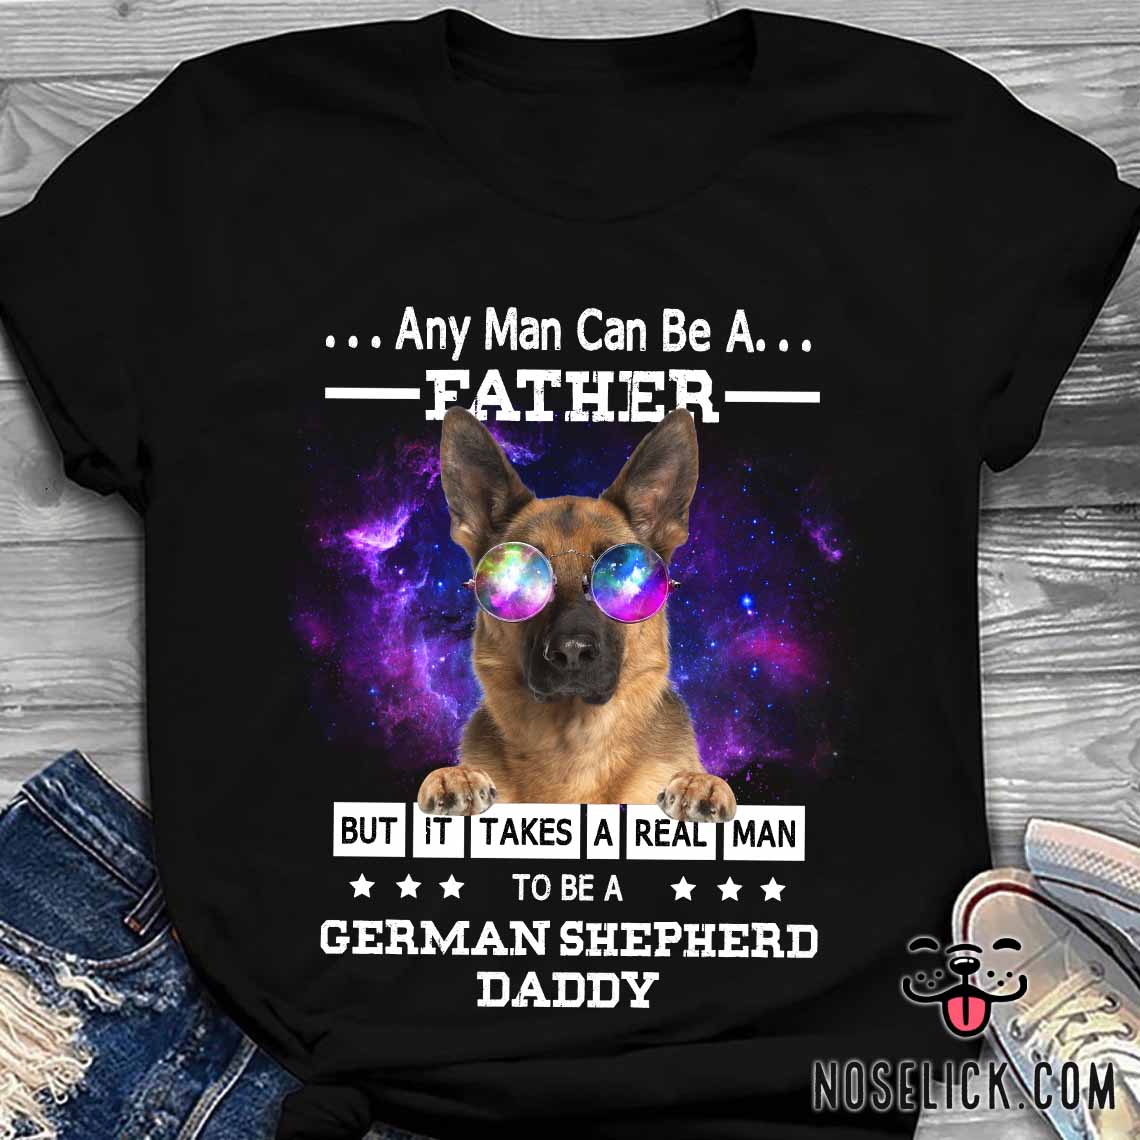 Any man can be a father but it takes a real man to be a German shepherd daddy